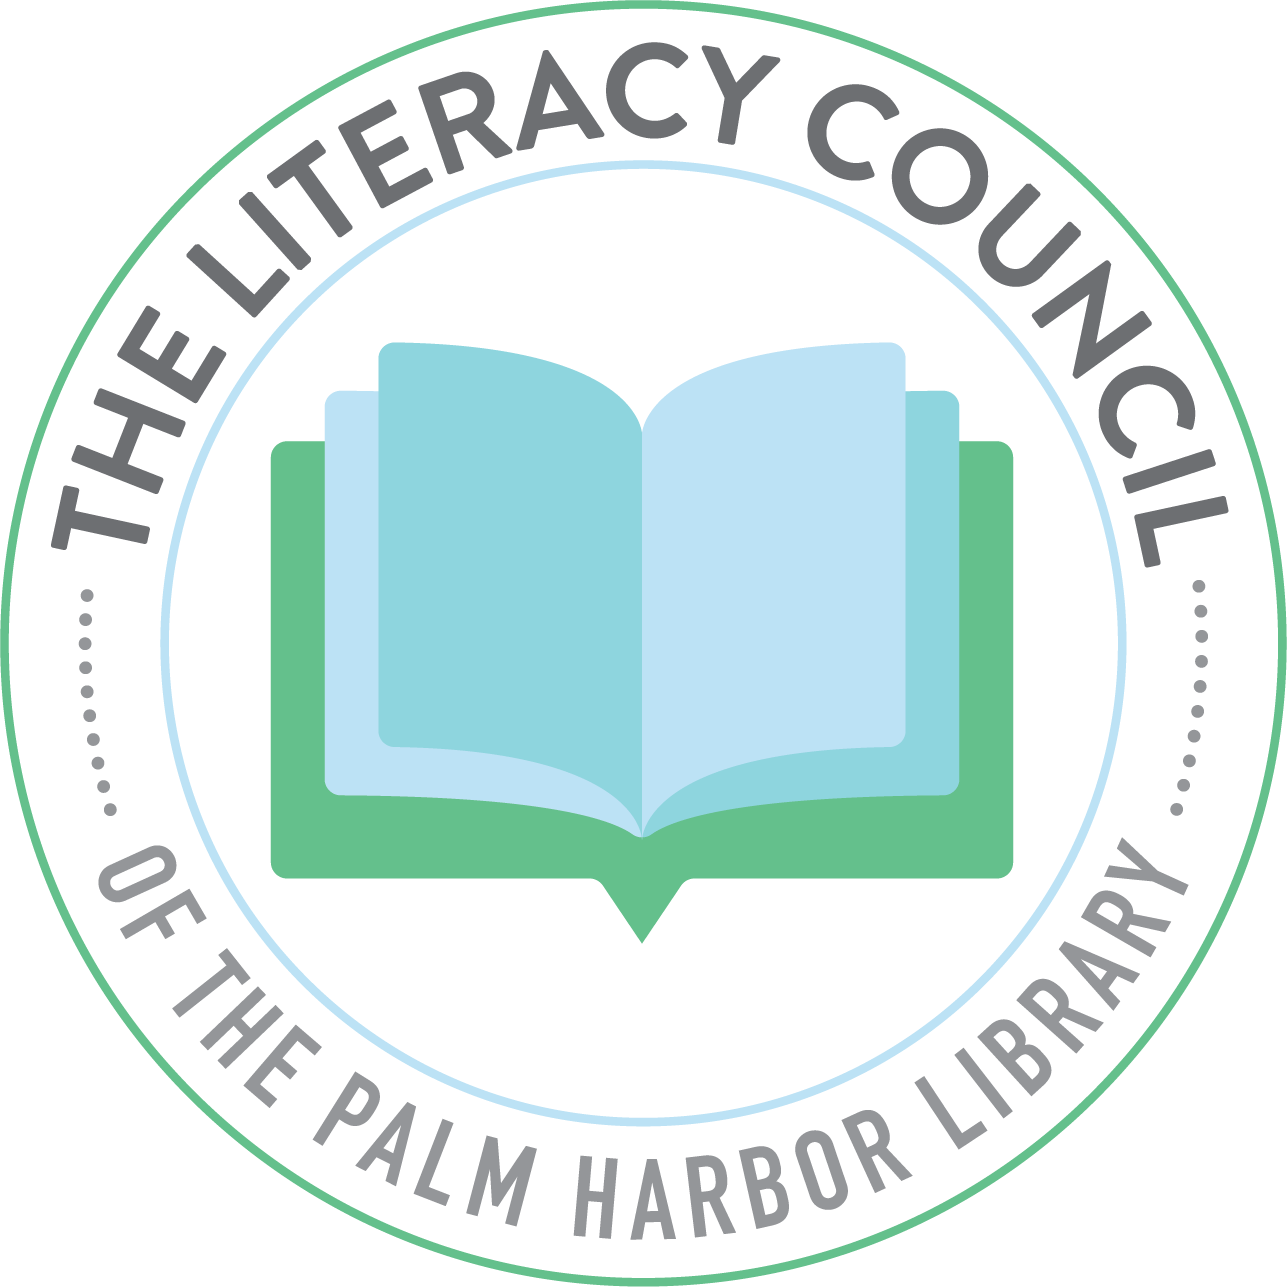 Literacy Council of the Palm Harbor Library Logo